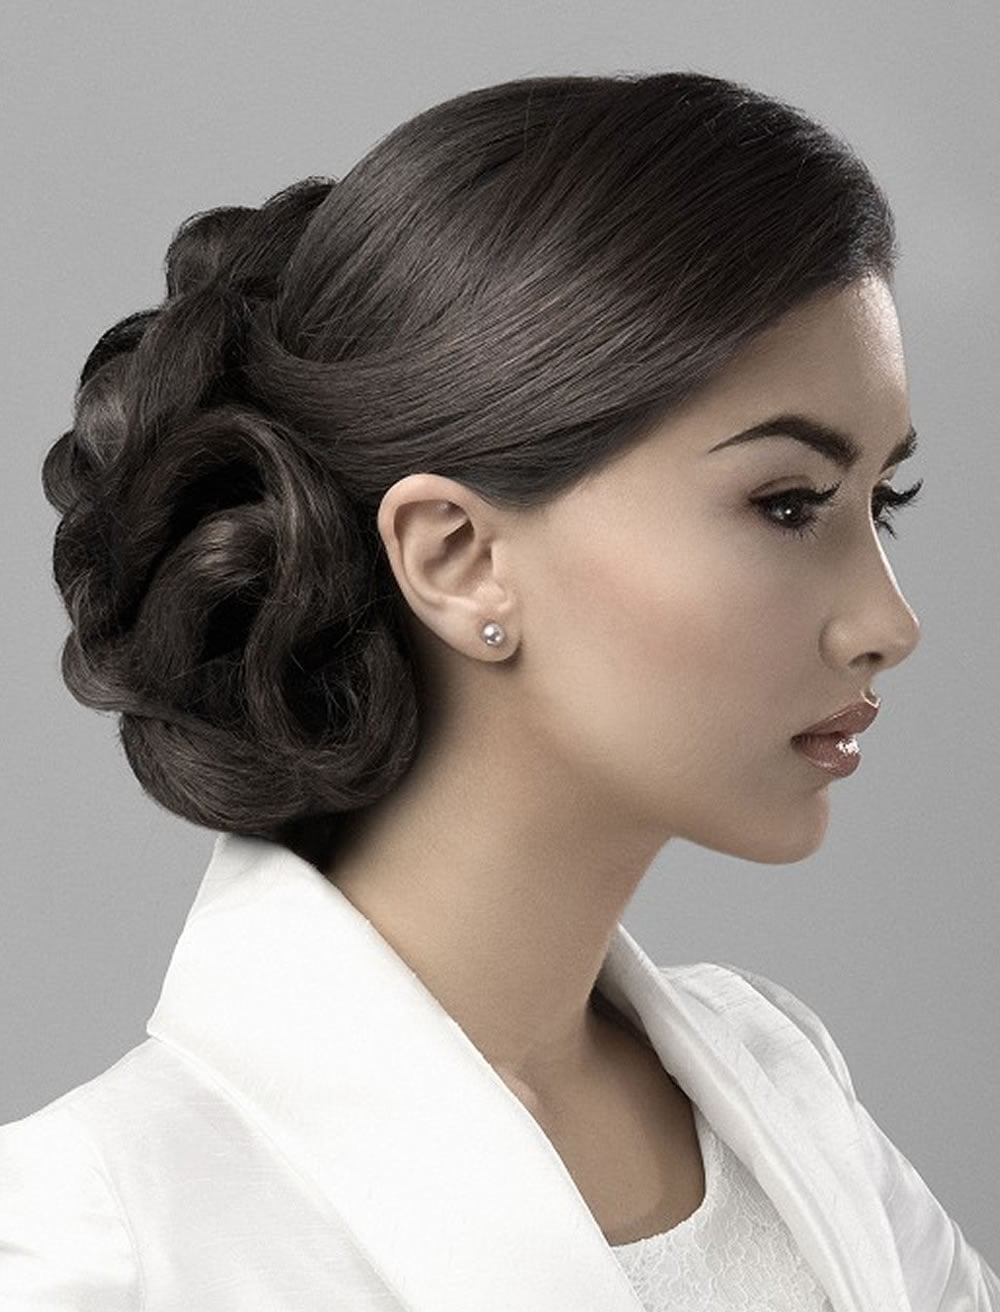 32 Perfect Updo Hairstyles for Prom 2020-2021 | Round ...